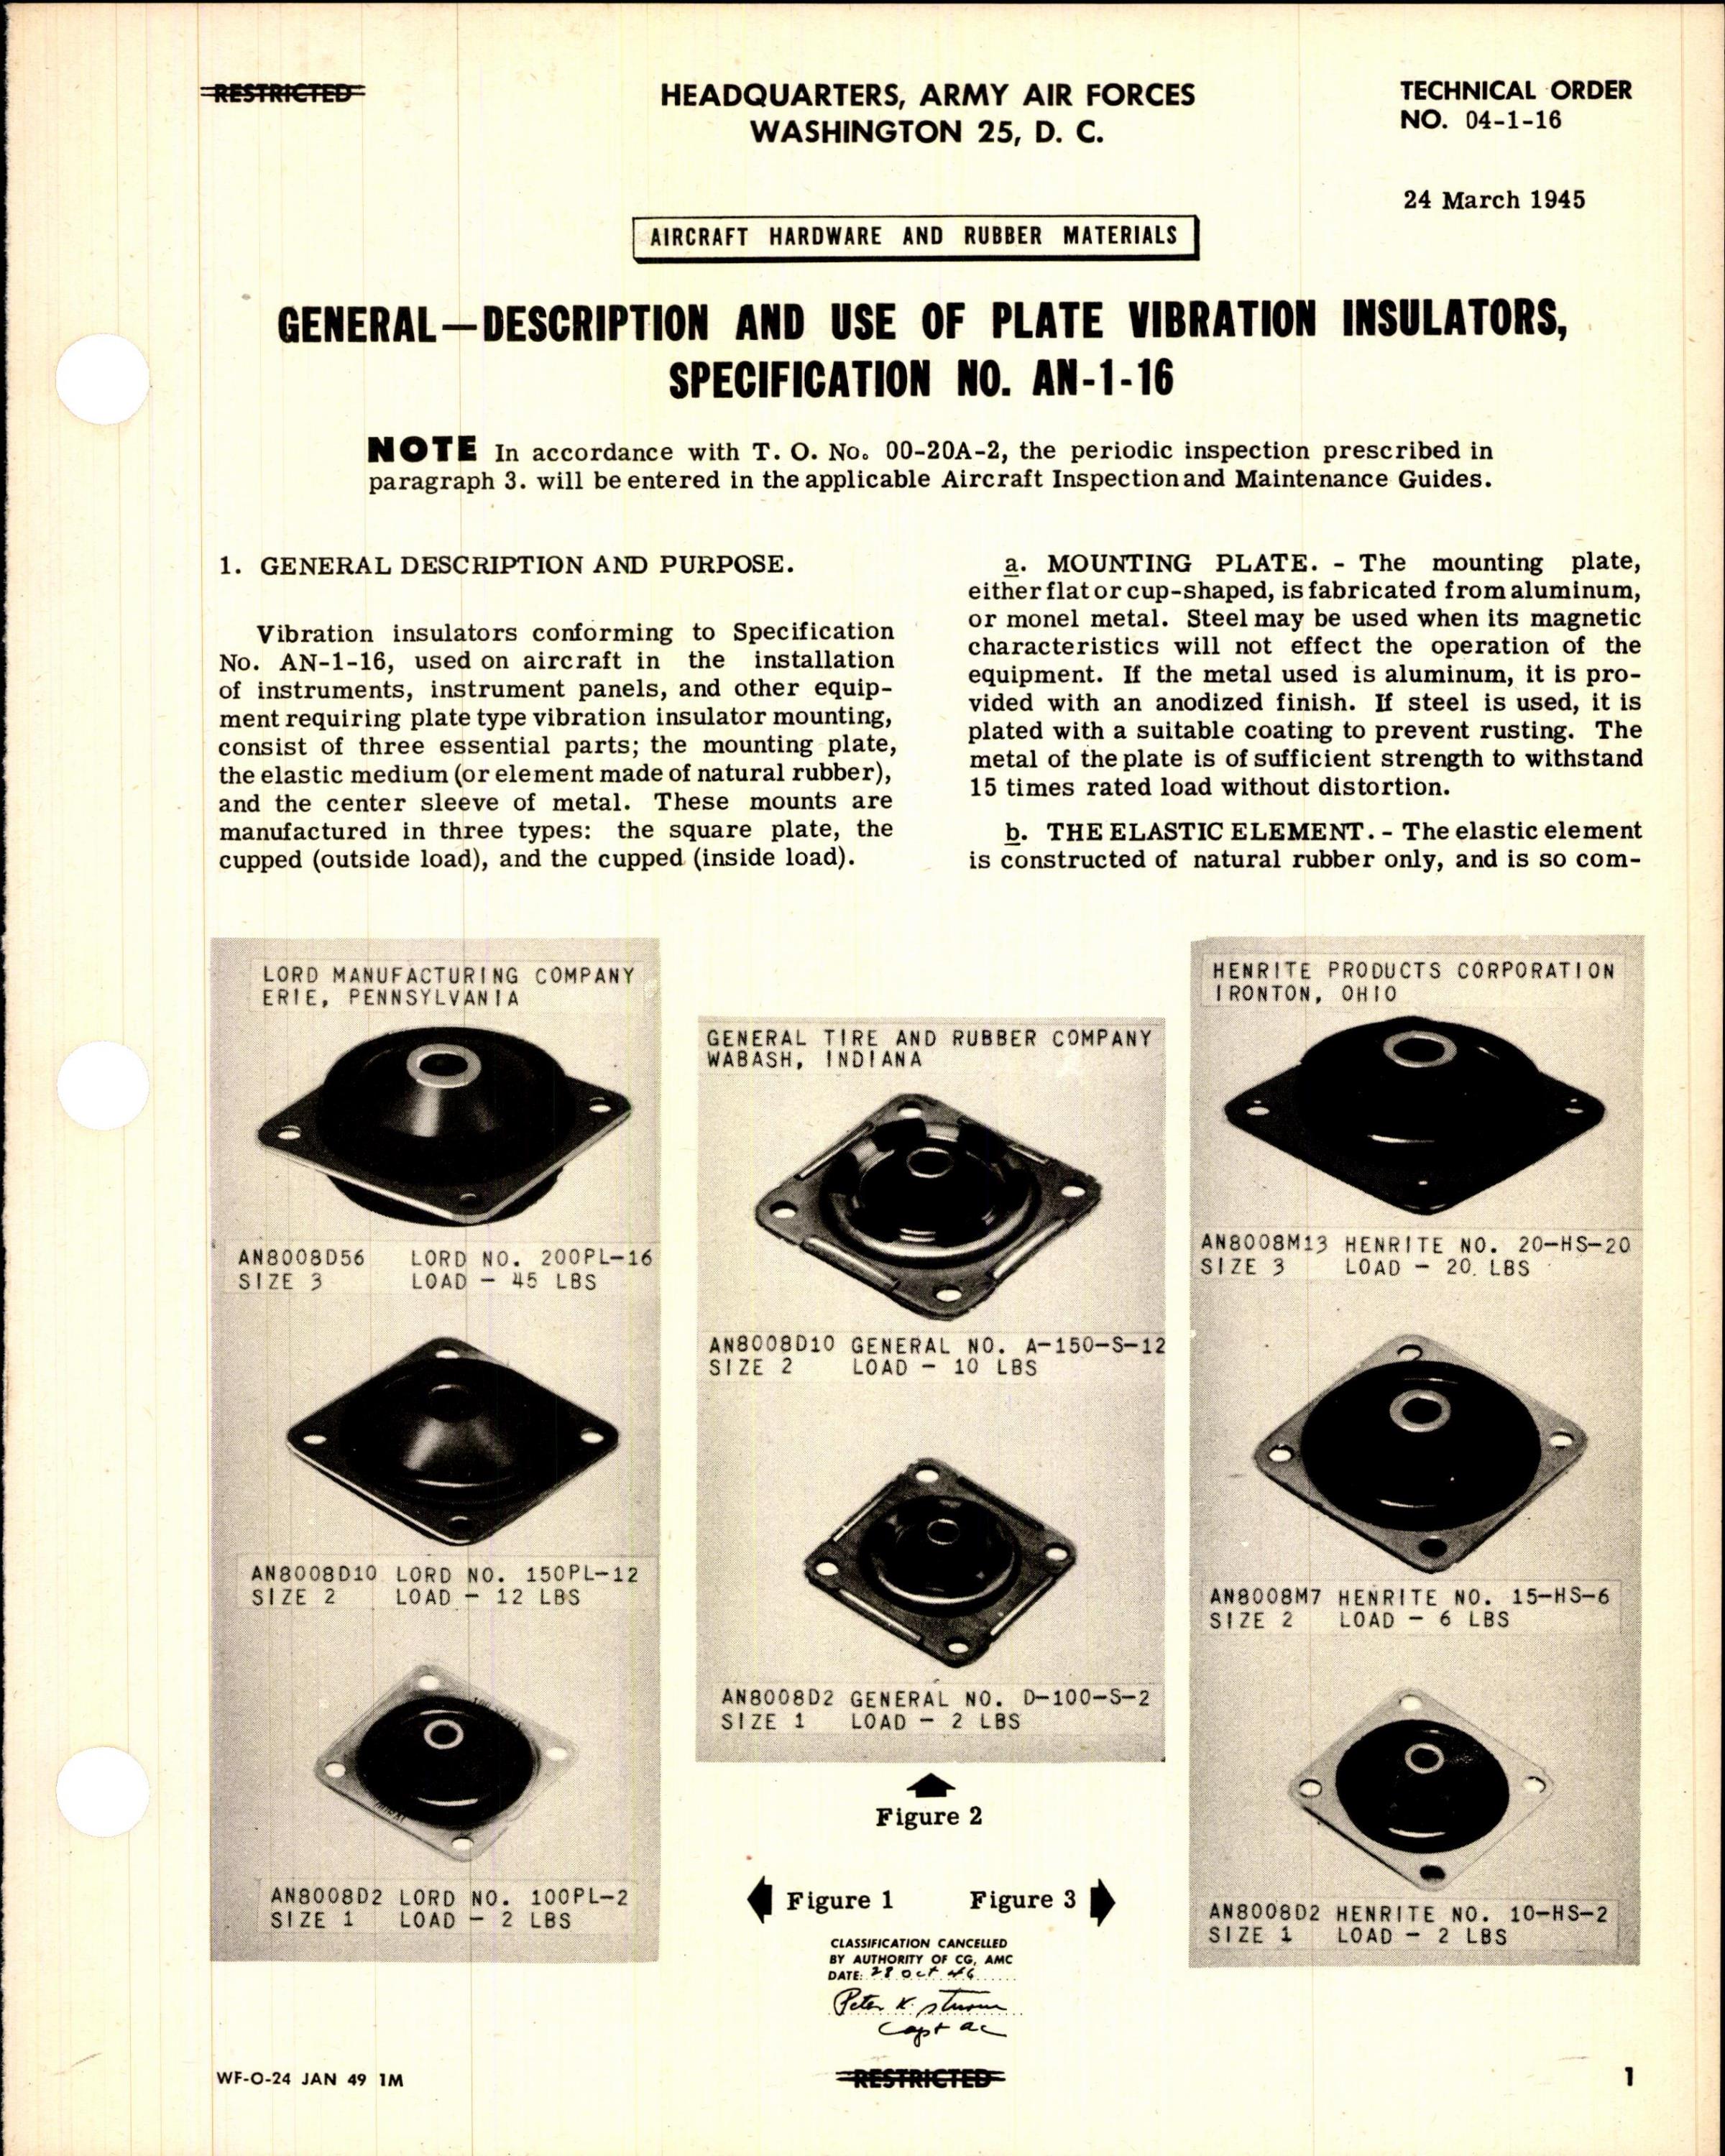 Sample page 1 from AirCorps Library document: Description and Use of Plate Vibration Insulators Specification No. AN-1-16